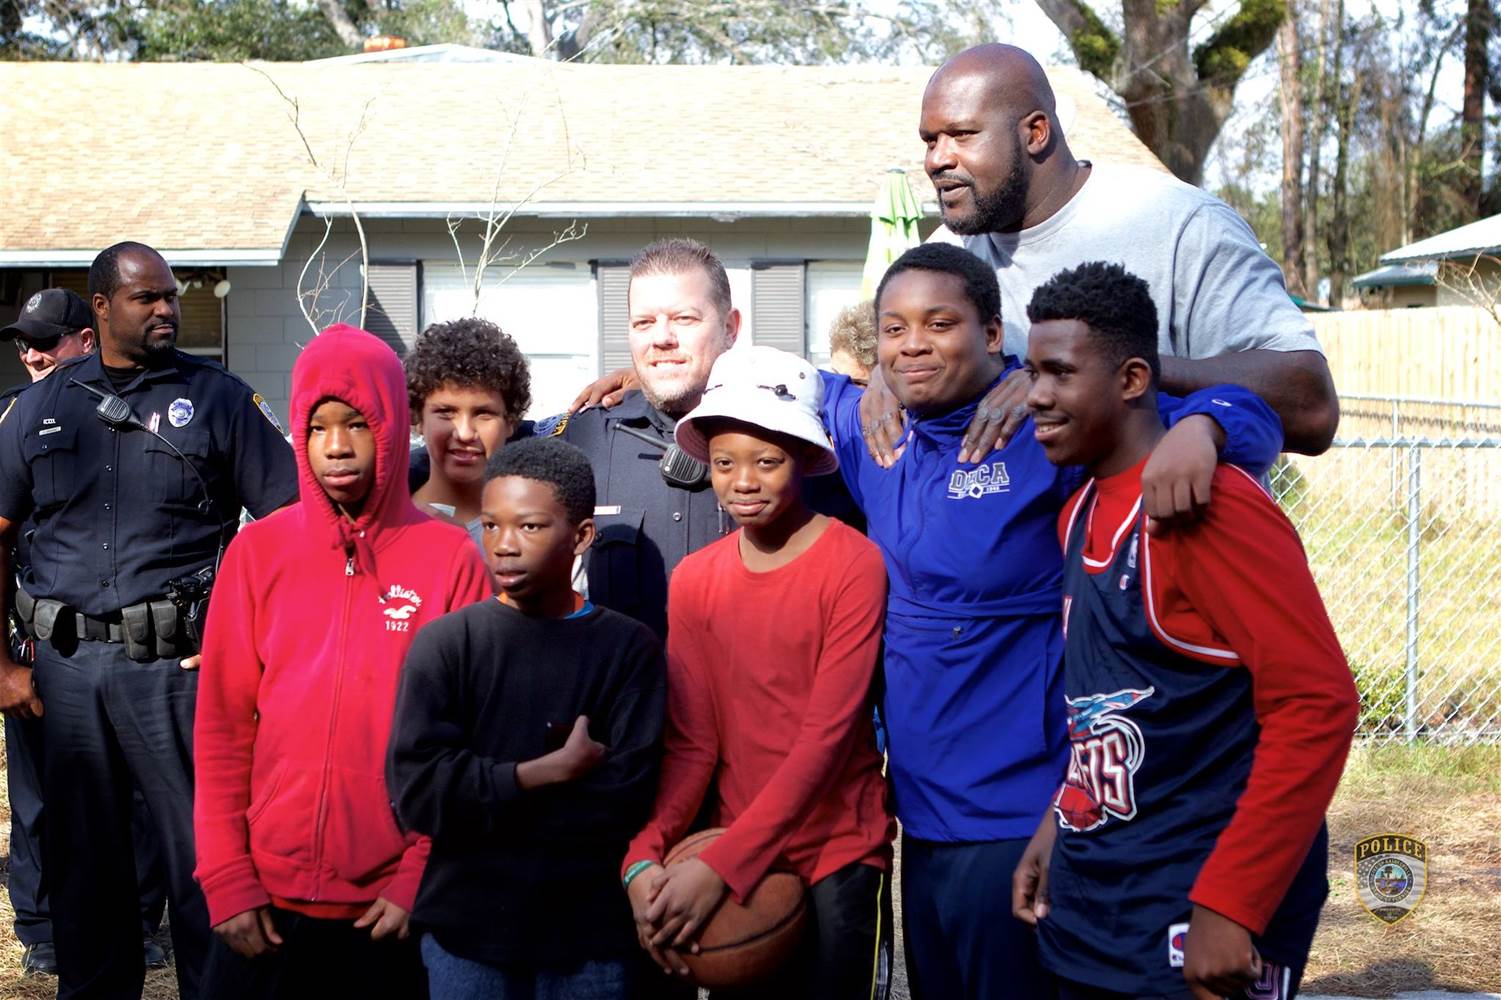 Shaq Surprises Florida Cop for Pickup Game With Kids After Viral Hoops Video